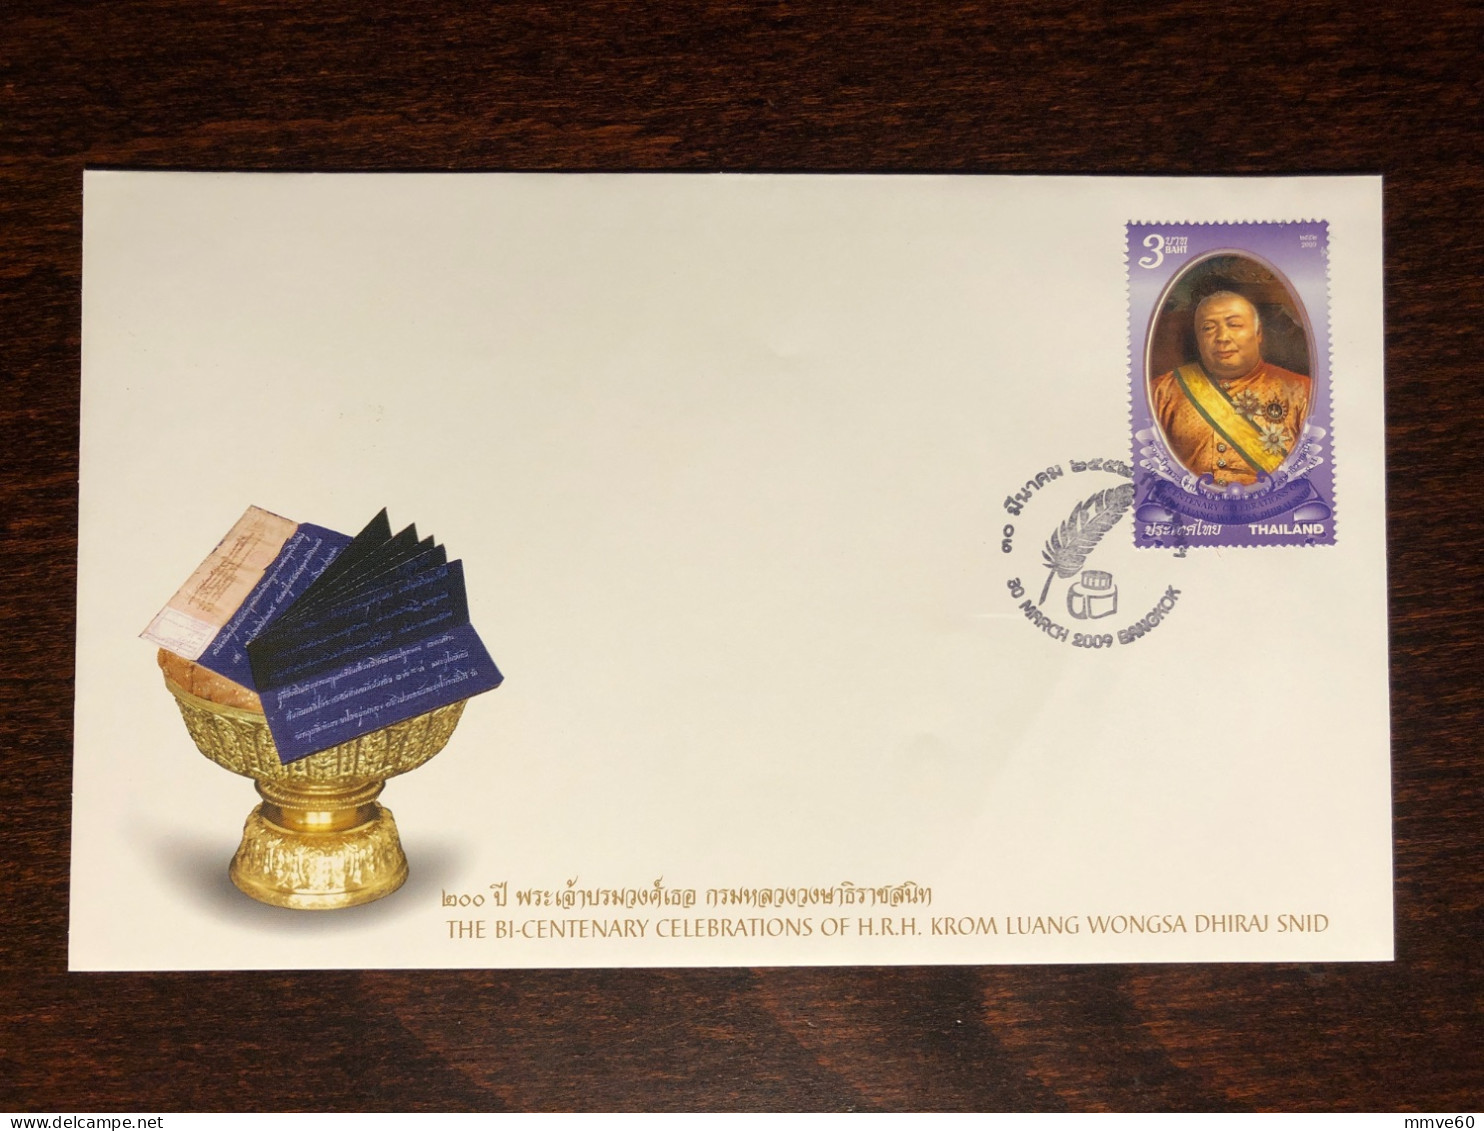 THAILAND FDC COVER 2009 YEAR WRITER POET  STAMPS - Tailandia